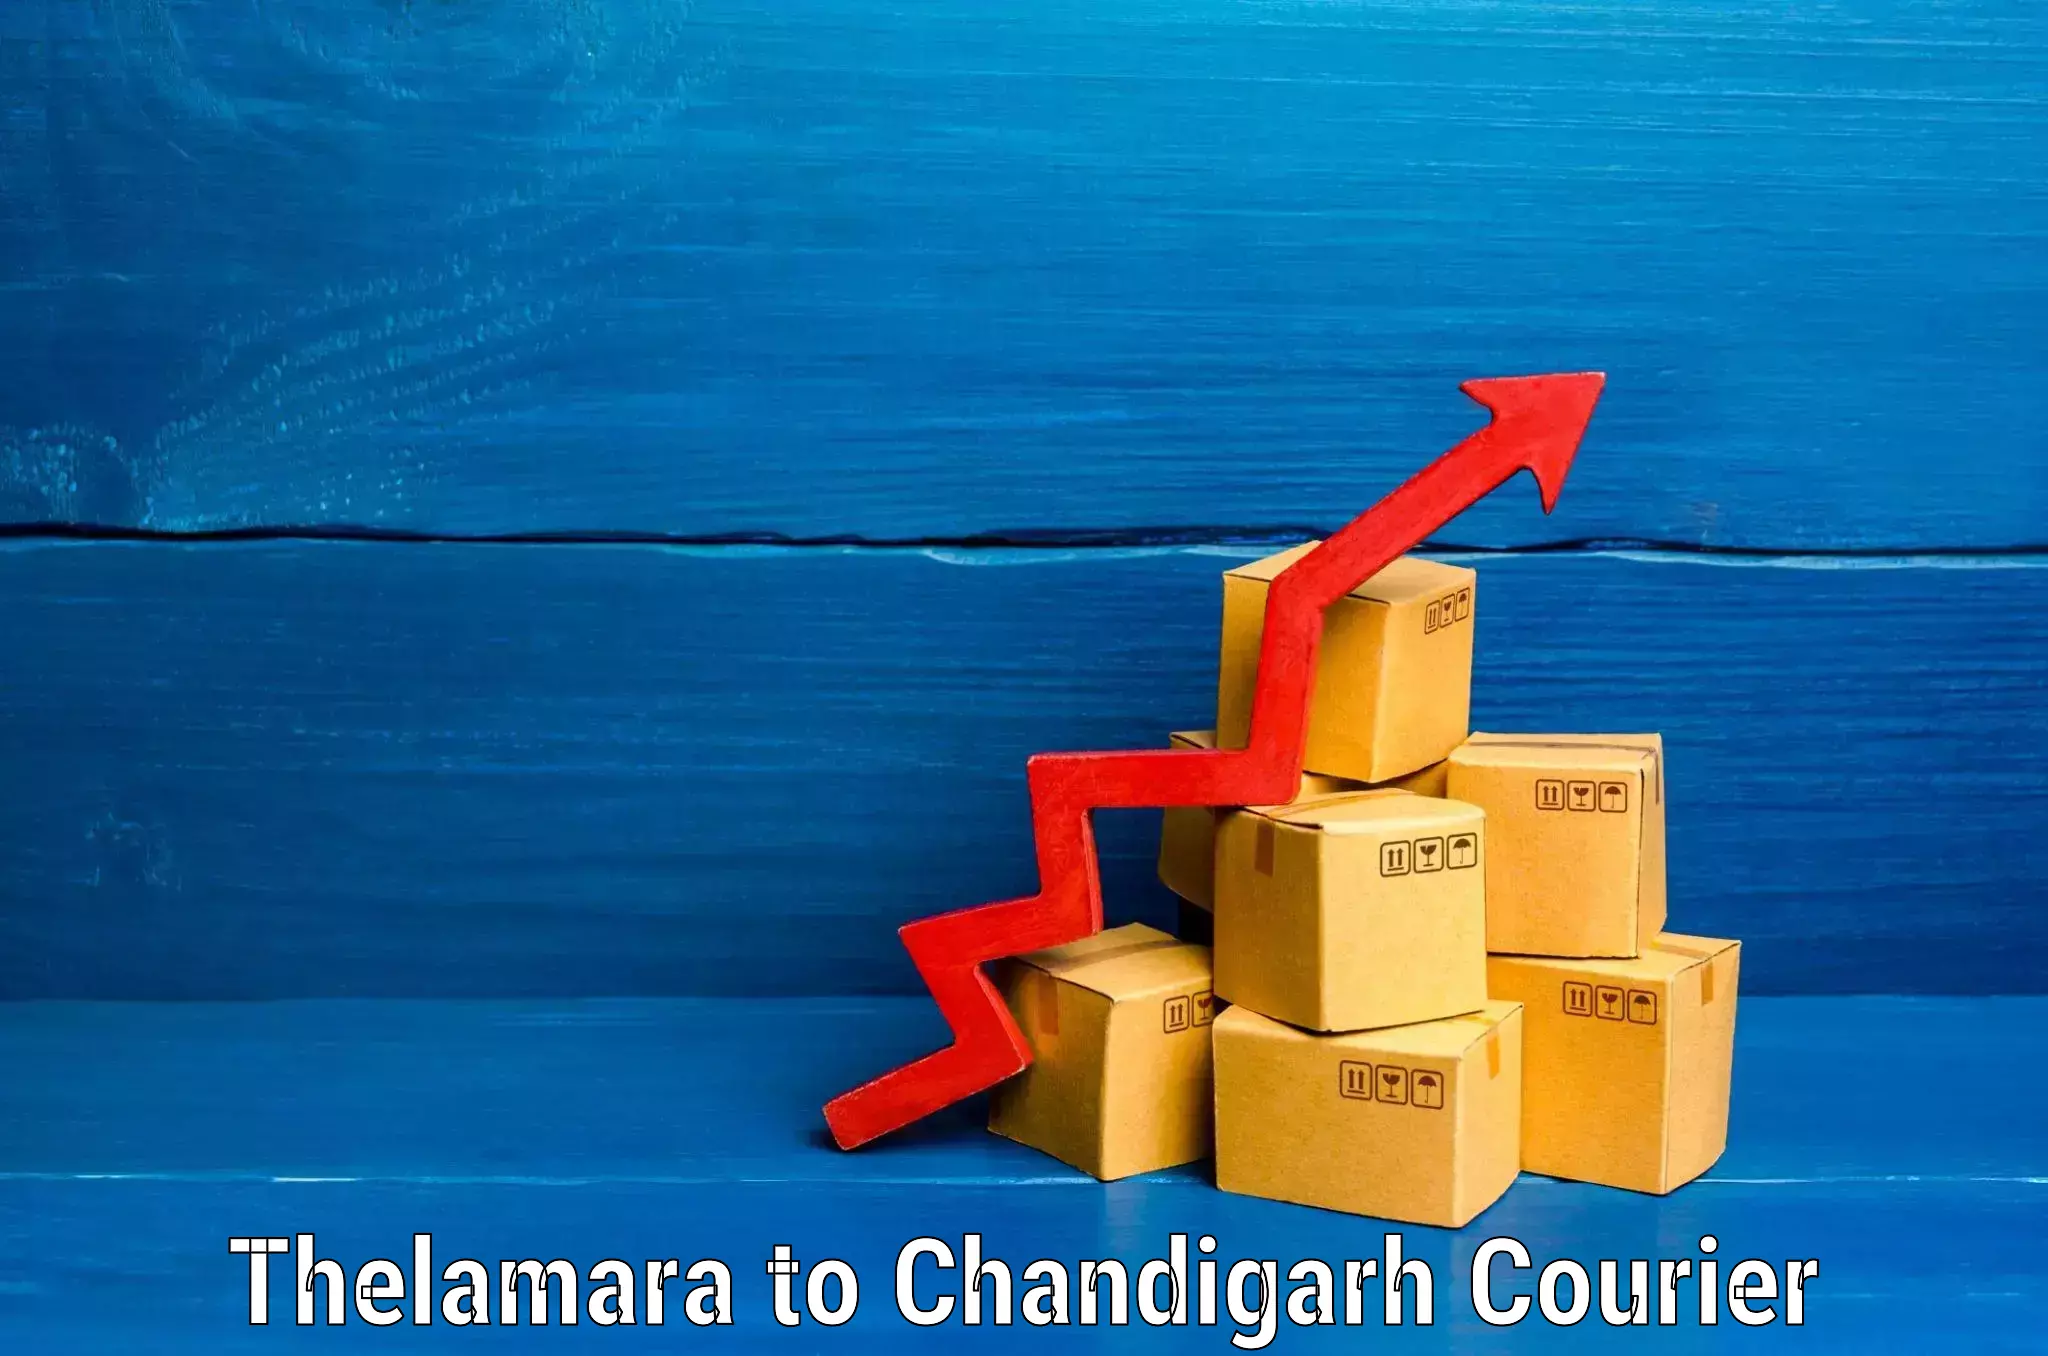 Luggage delivery system Thelamara to Chandigarh